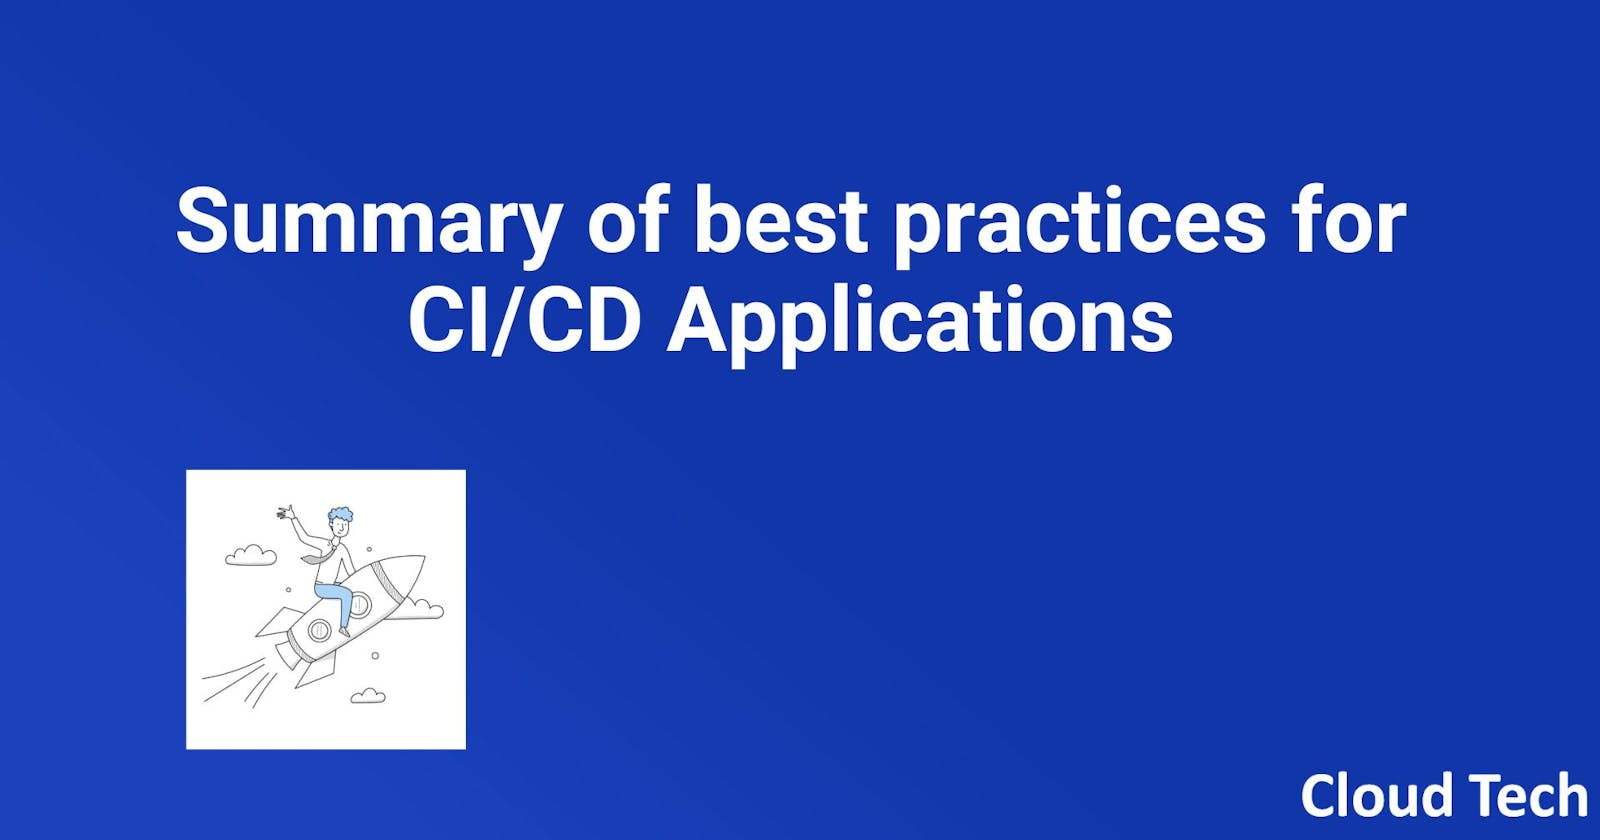 Summary of best practices for CI/CD Applications